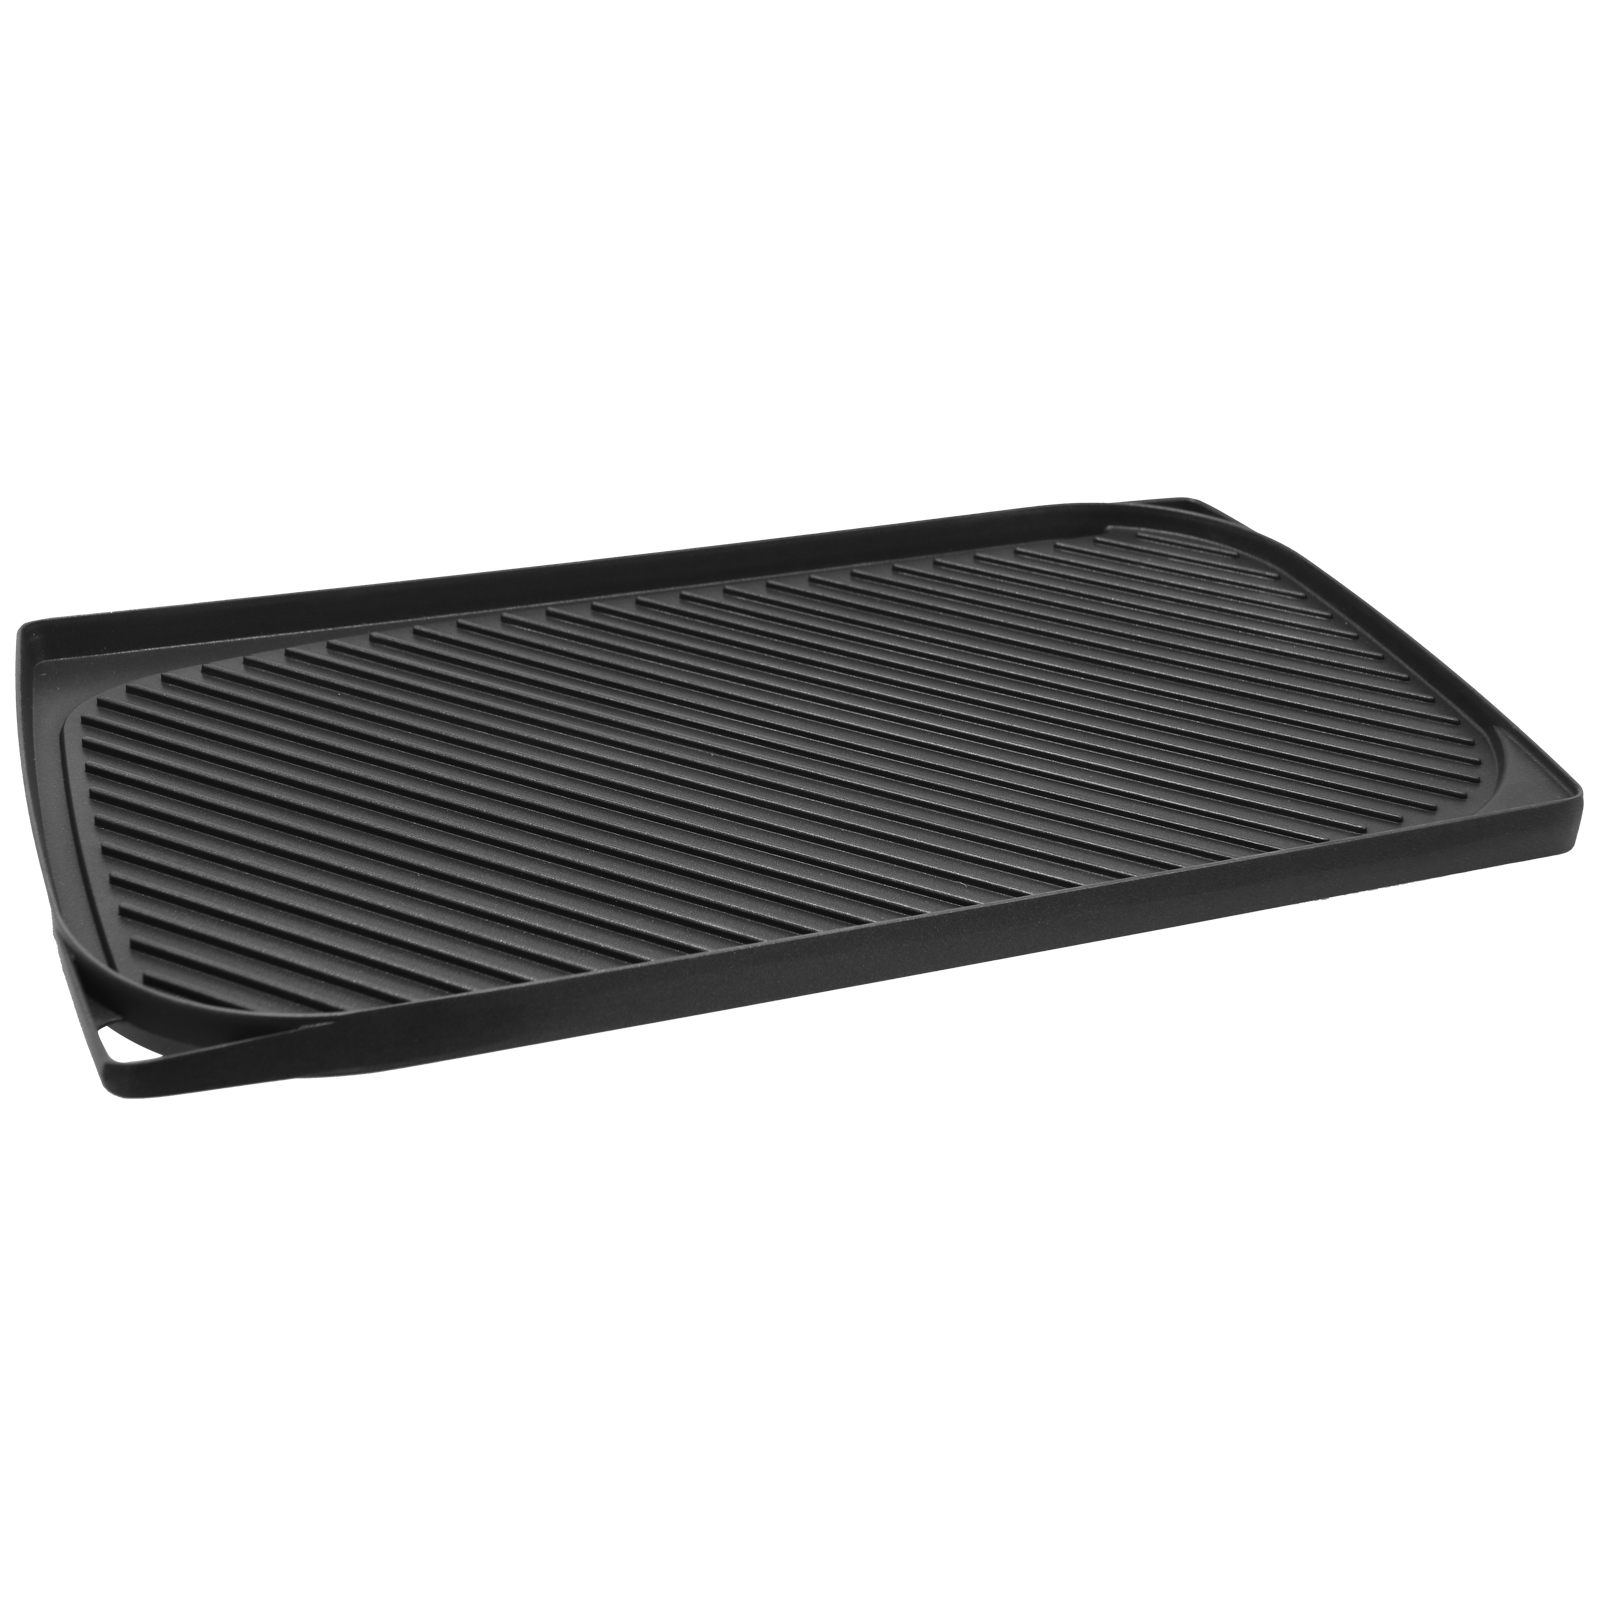 Oster Cocina Lozano Reversible Grill/Griddle